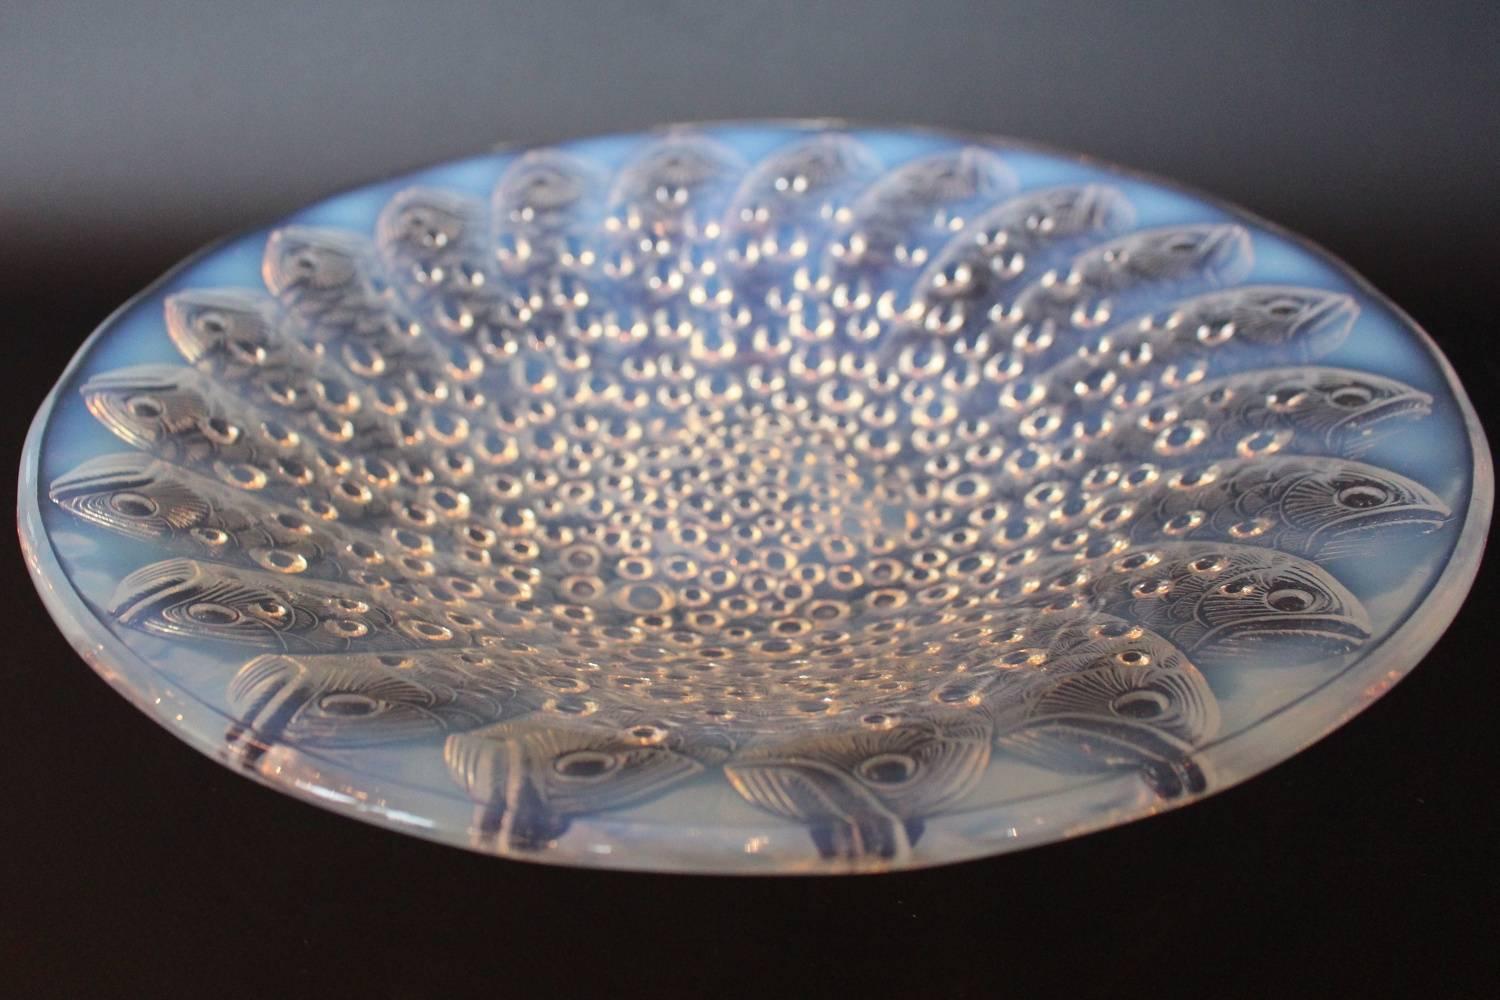 Roscoff, an Art Deco glass bowl by René Lalique (1860-1945). Decorated with a raised, design of concentric fish emerging from a mass of swirling bubbles.
Marcilhac Catalogue Raisonné p.306

Etched R Lalique France to base

Measures: Diameter